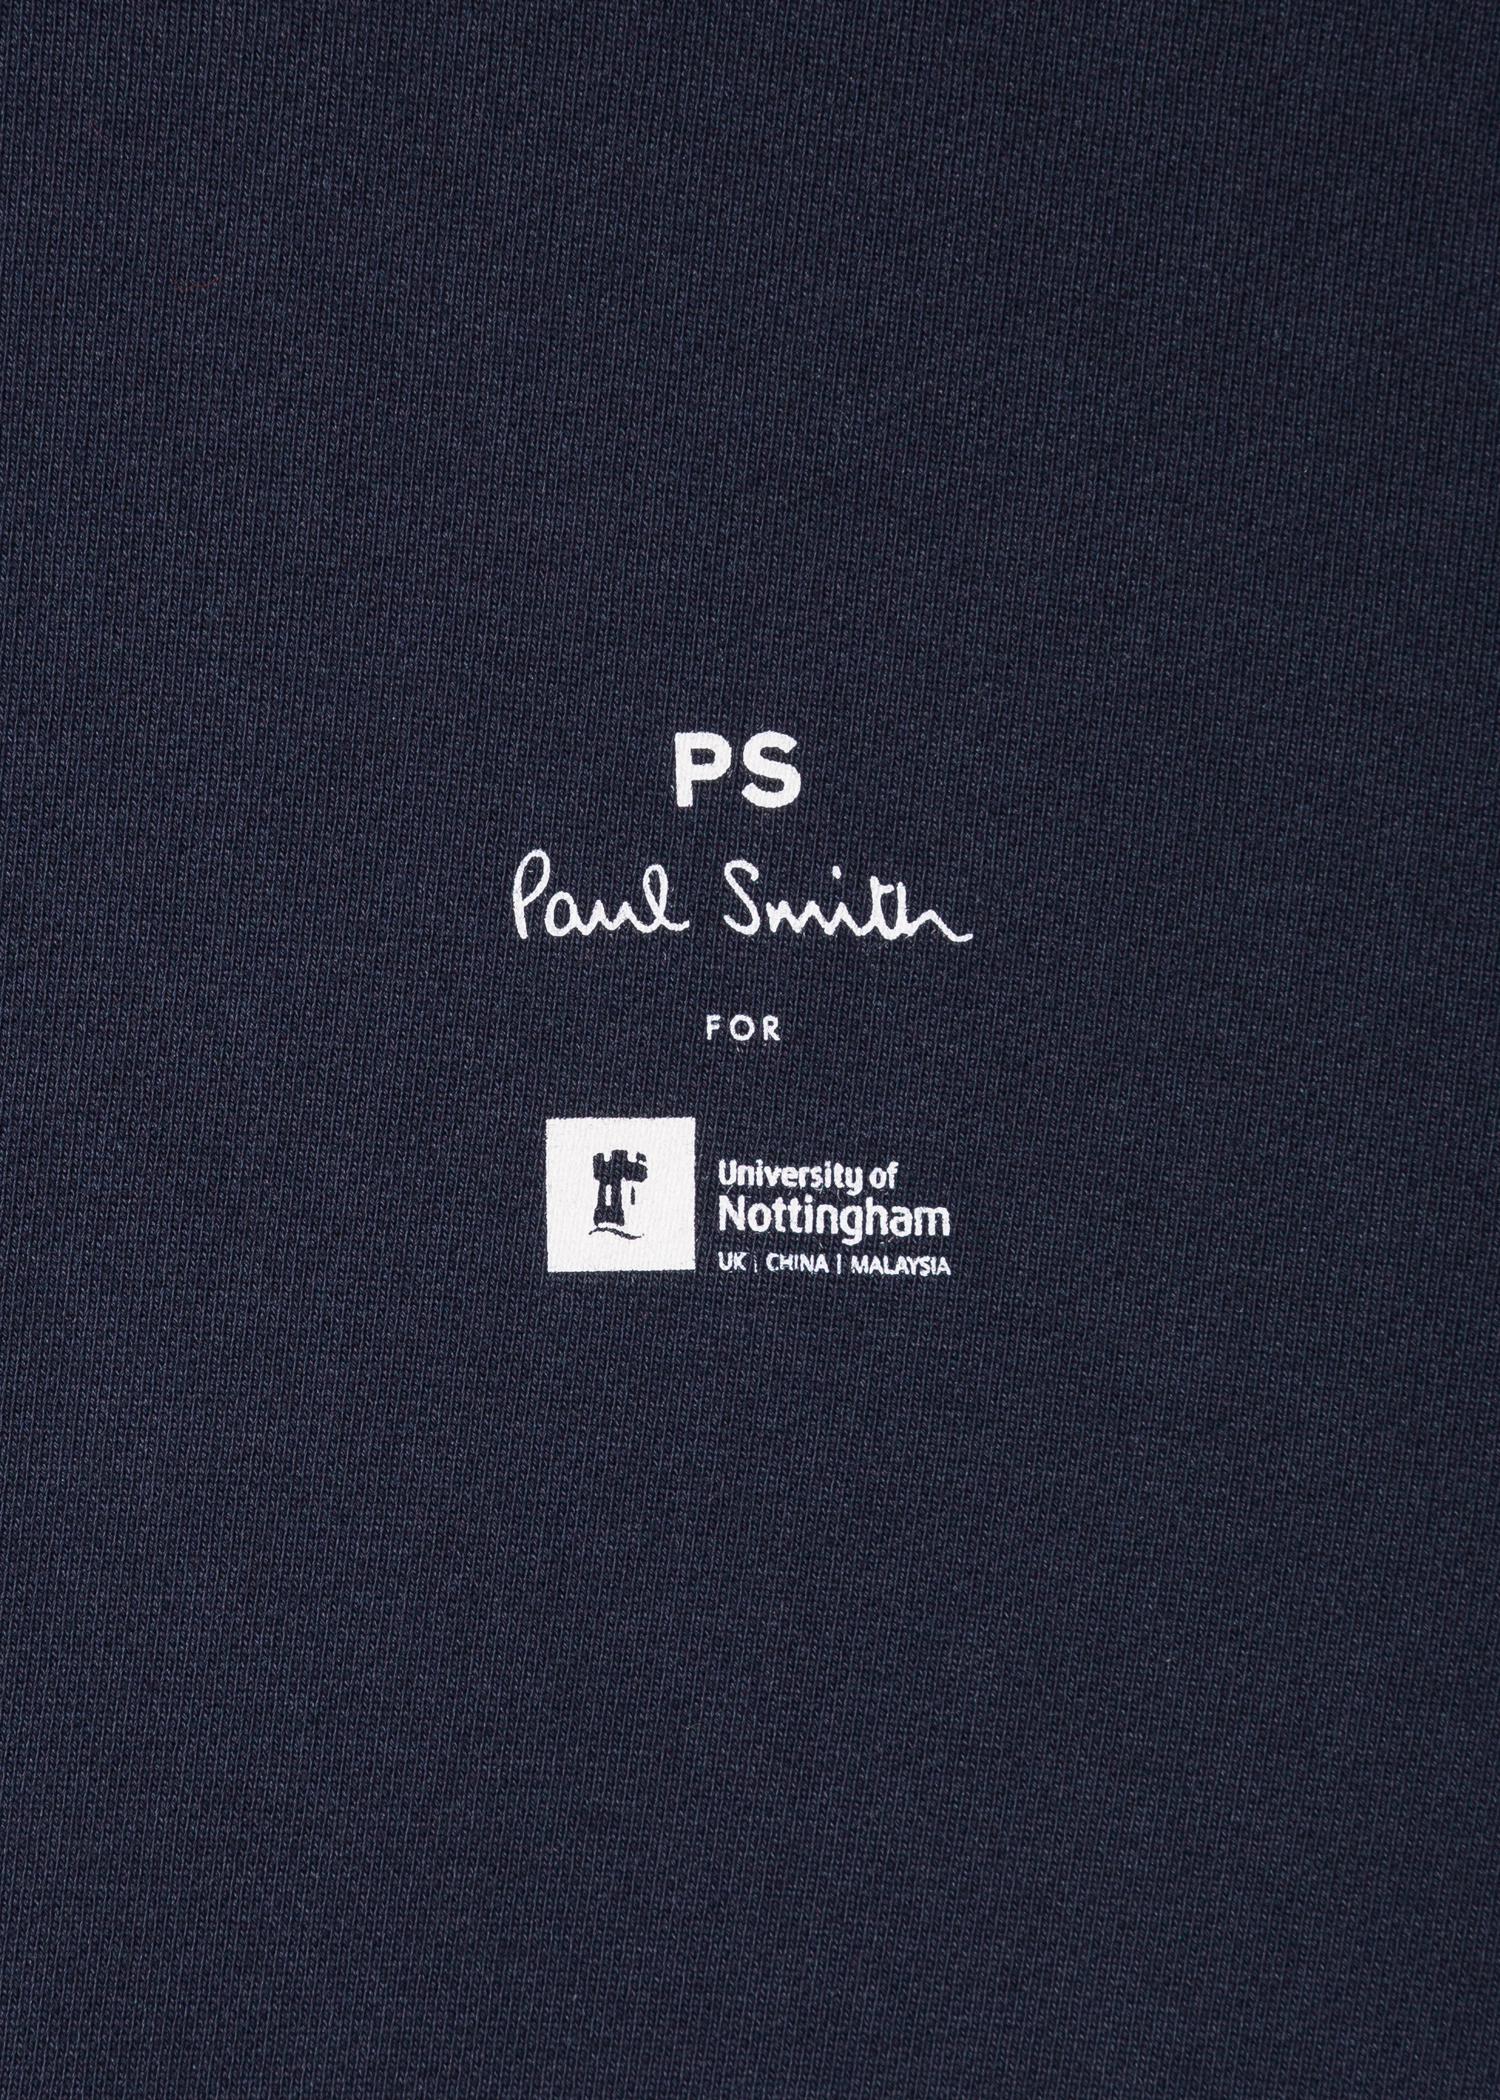 Detail view - Paul Smith For University Of Nottingham - Navy 'Trent Building' Print Hoodie Paul Smith